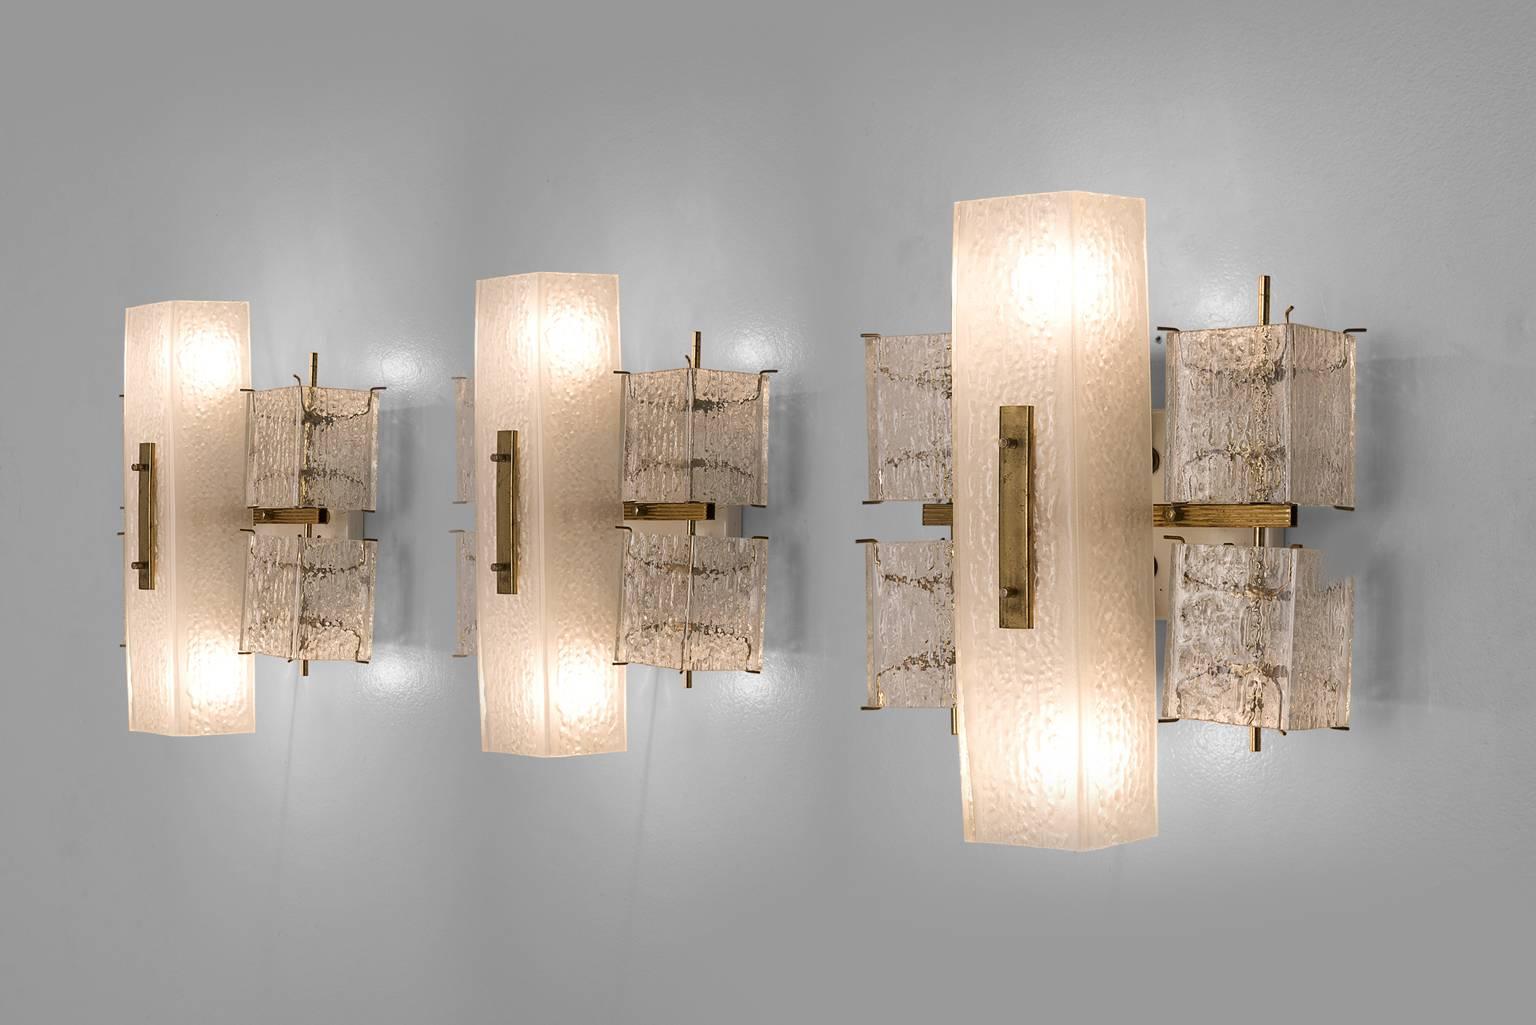 Wall lights, in glass and brass, Europe, 1970s. 

This elegant square wall lights features four small rectangular structured glass shades and a rectangular opaque middle section. The frame is made of brass and holds small brass pins on which the